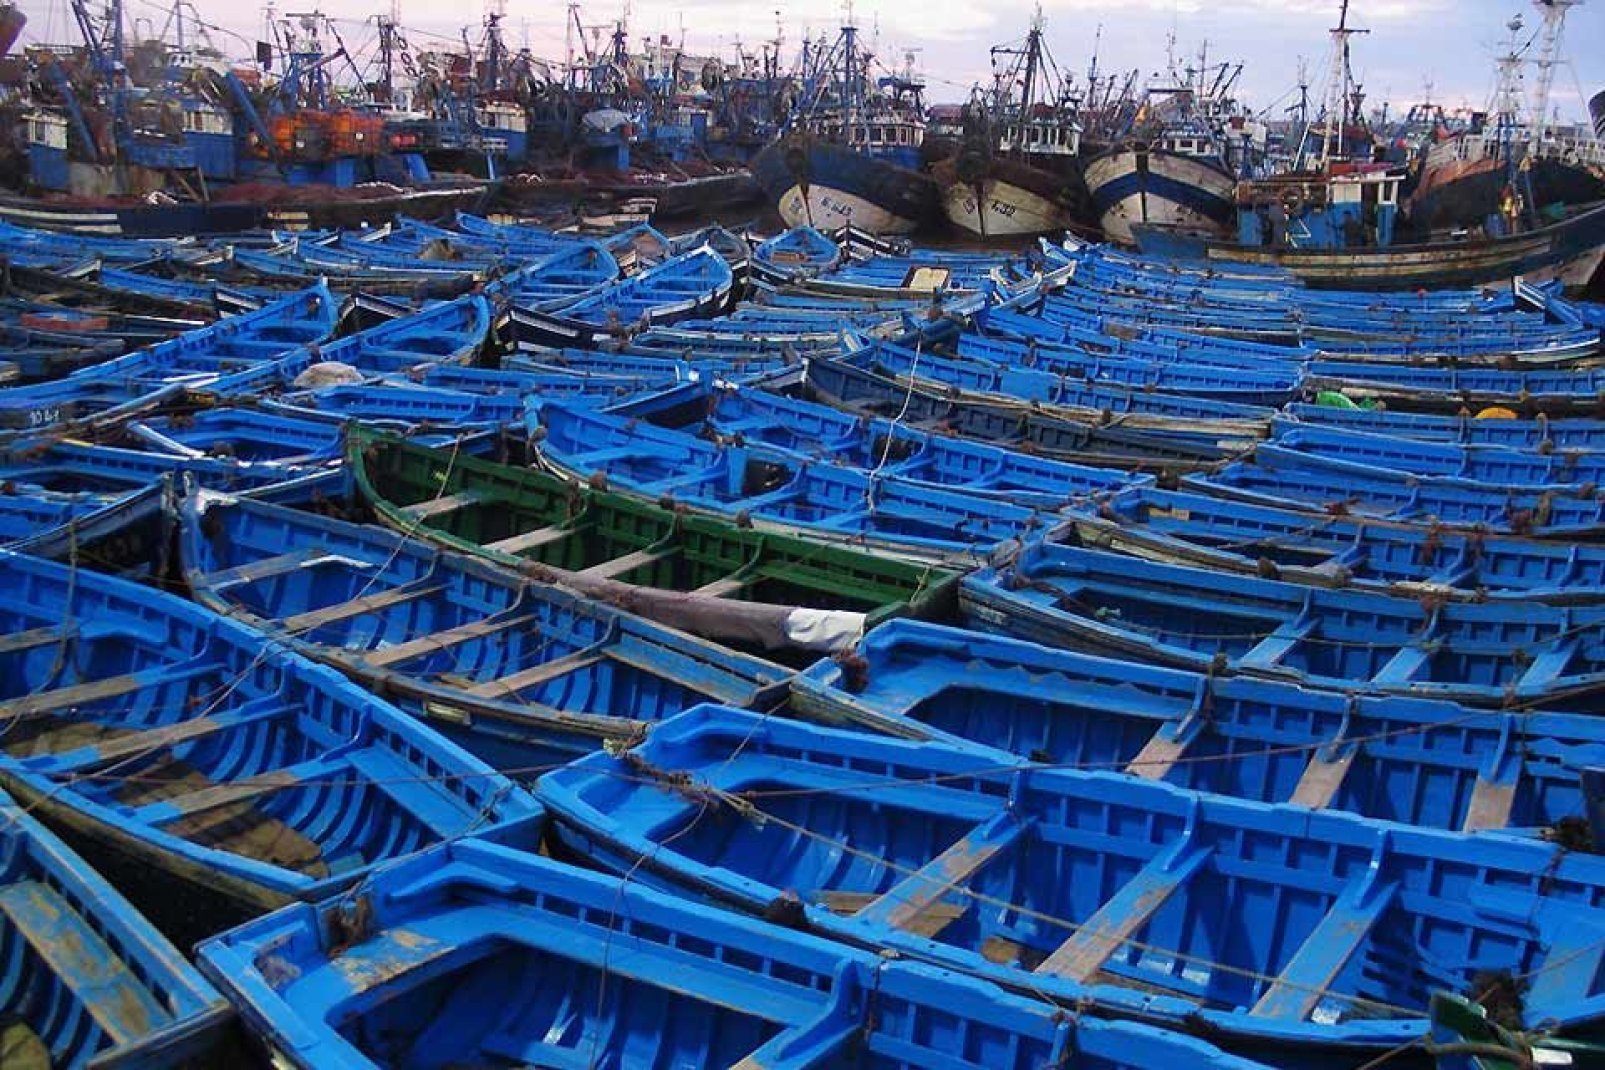 The boats in the traditional fishing port are blue to trick the sardines